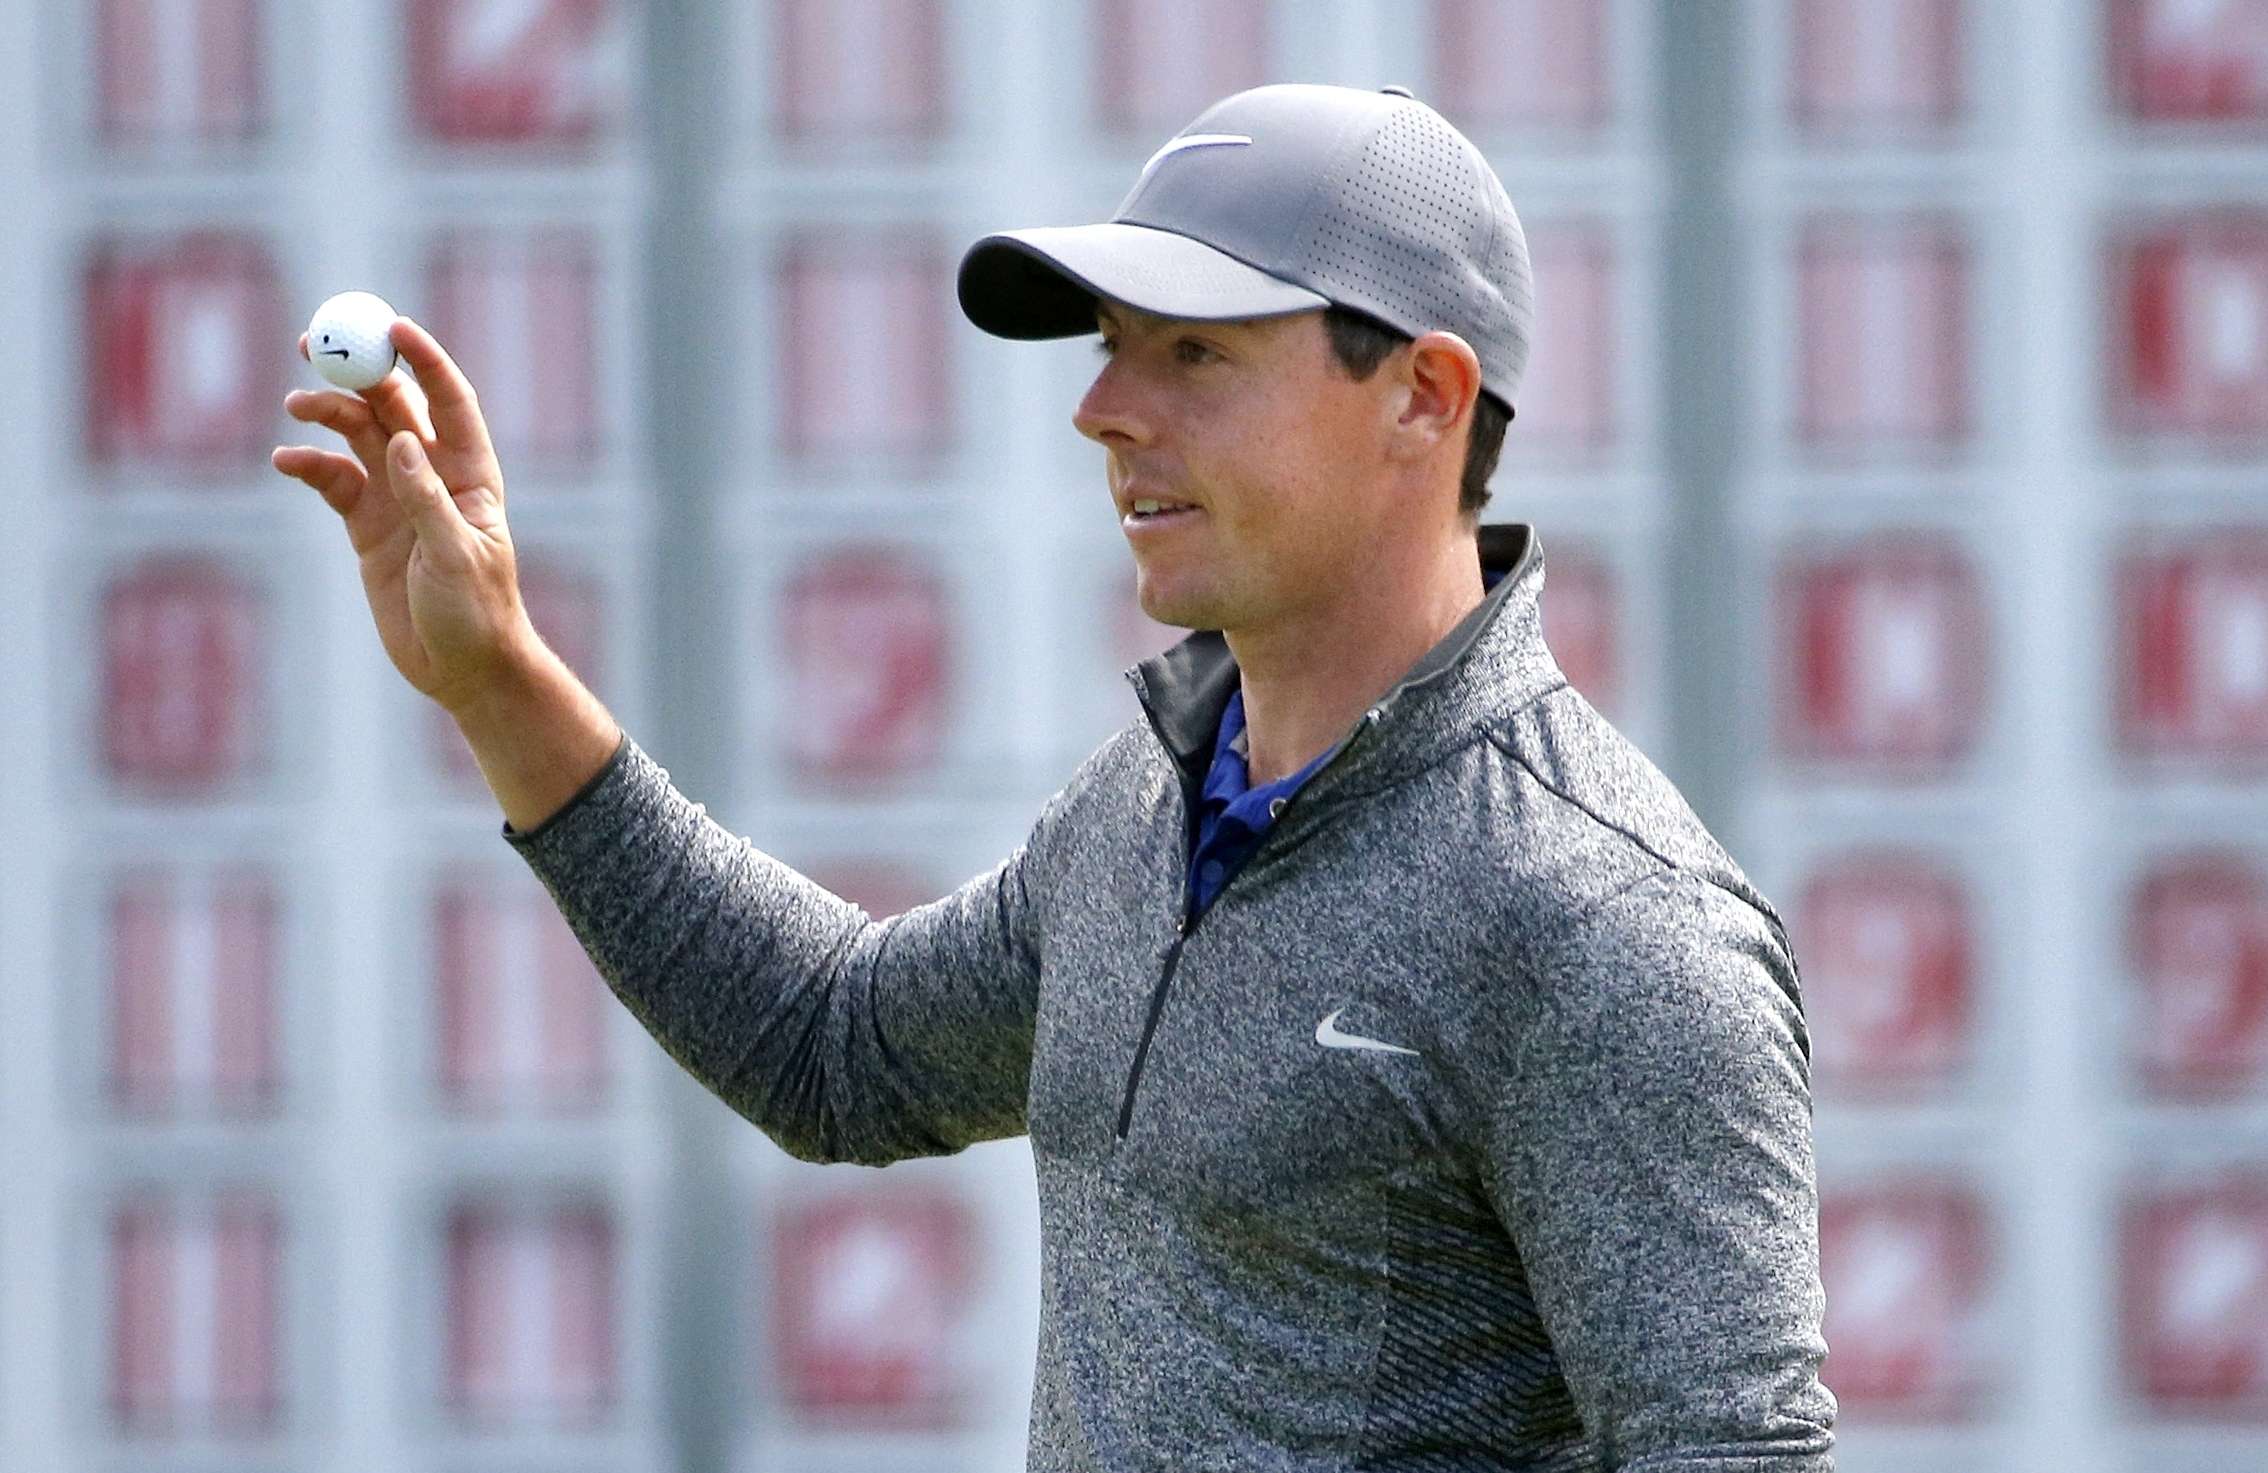 Rory McIlroy during the final round of the Deutsche Bank Championship. Photo: AP